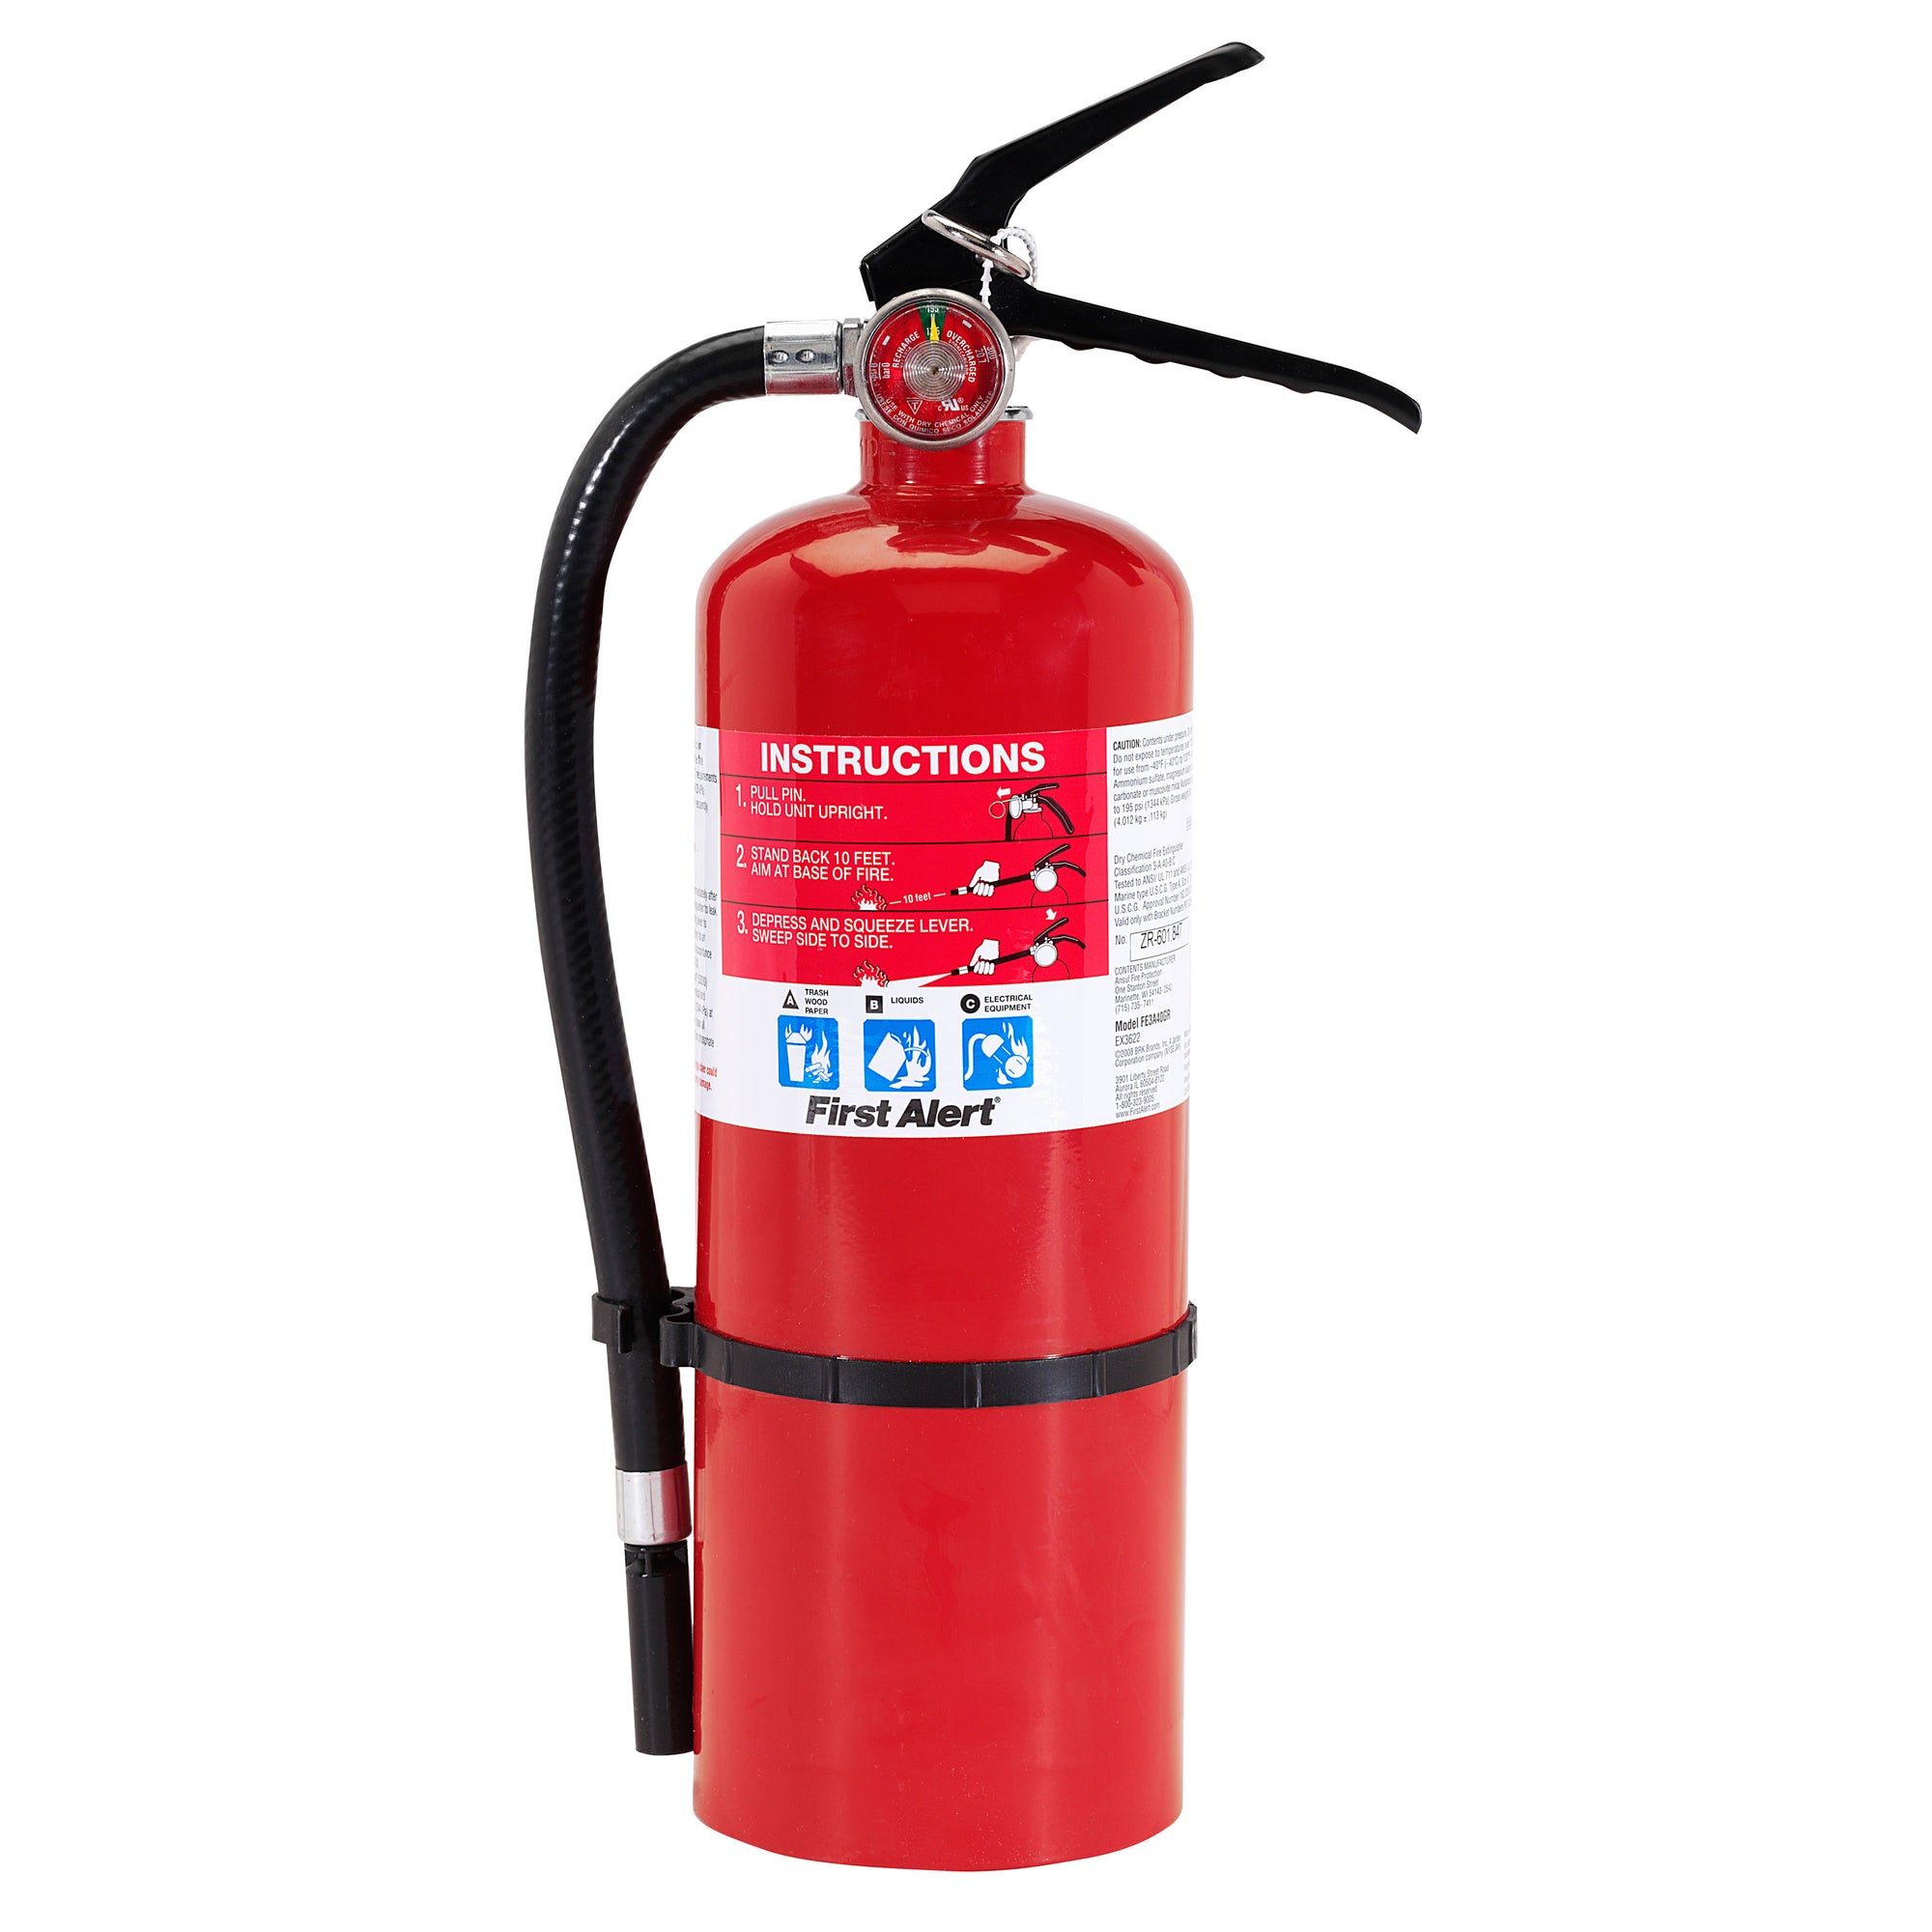 First Alert PRO5 Rechargeable Heavy Duty Plus Fire Extinguisher 3-A:40-B:C, Red